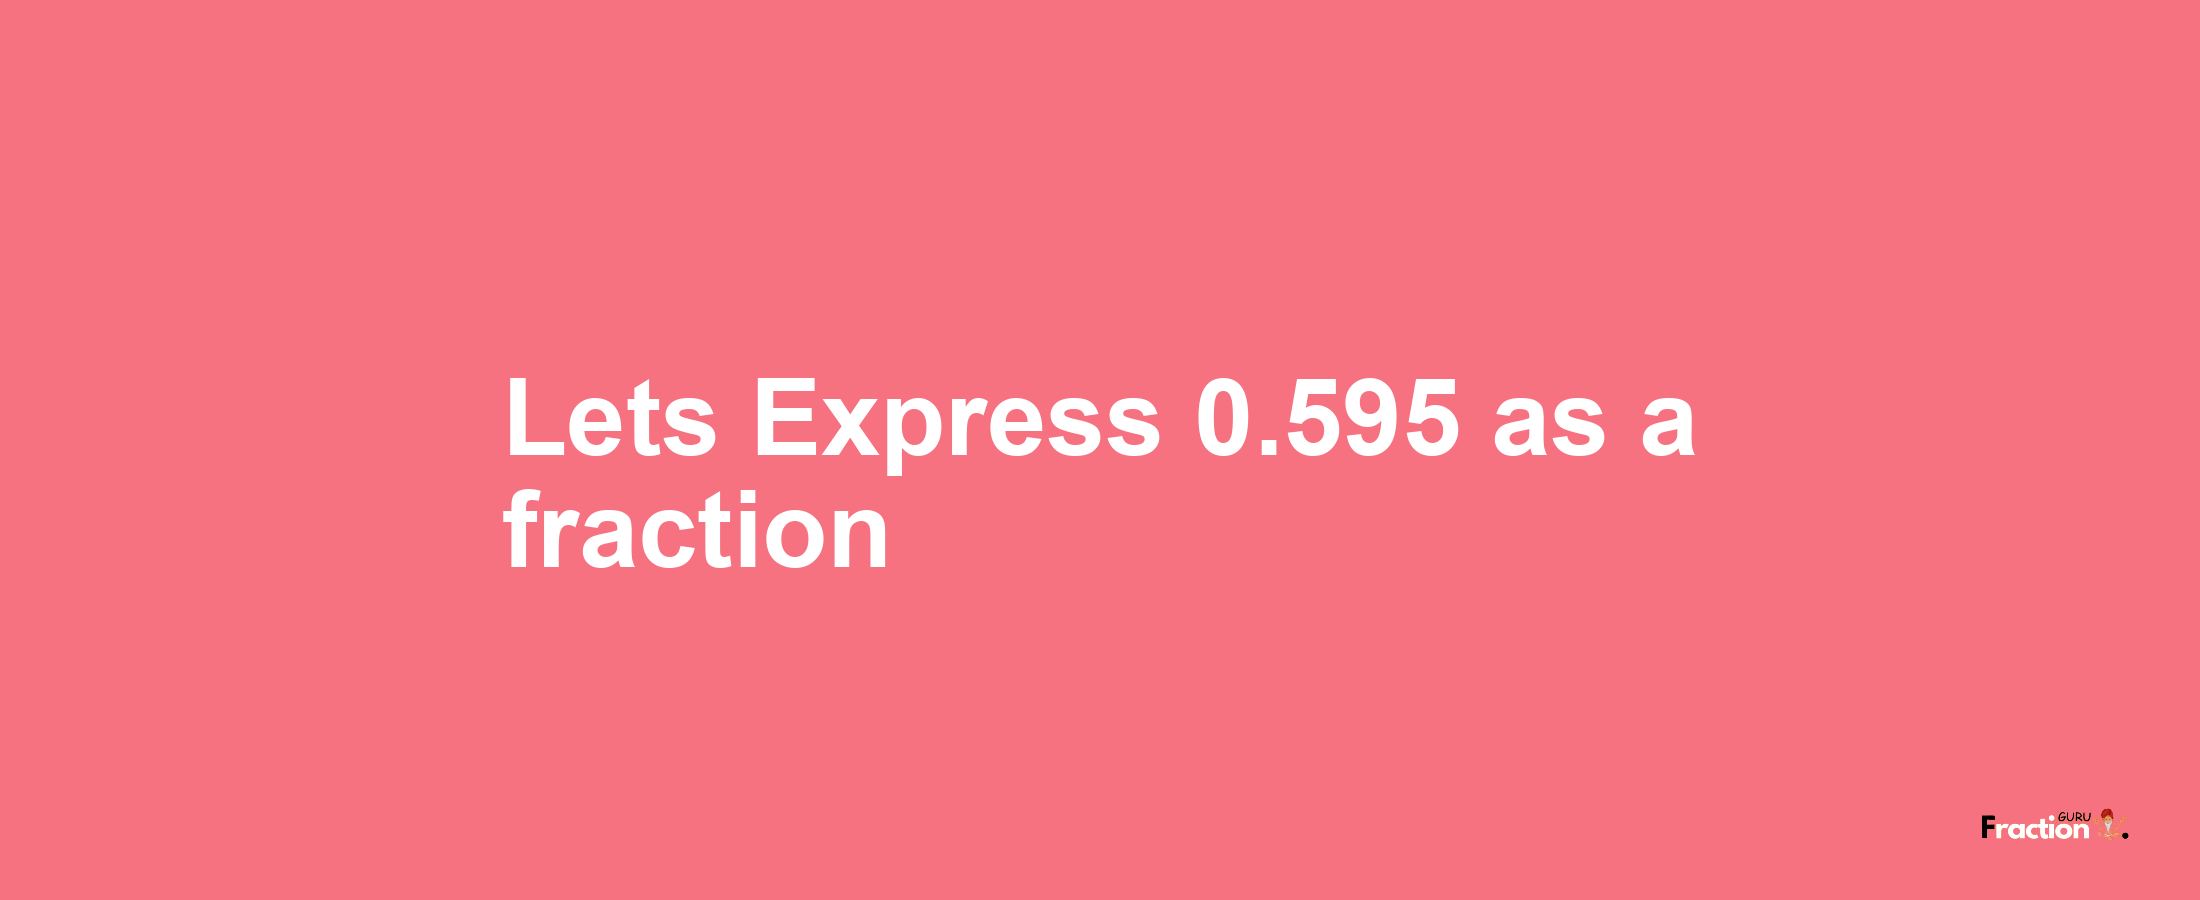 Lets Express 0.595 as afraction